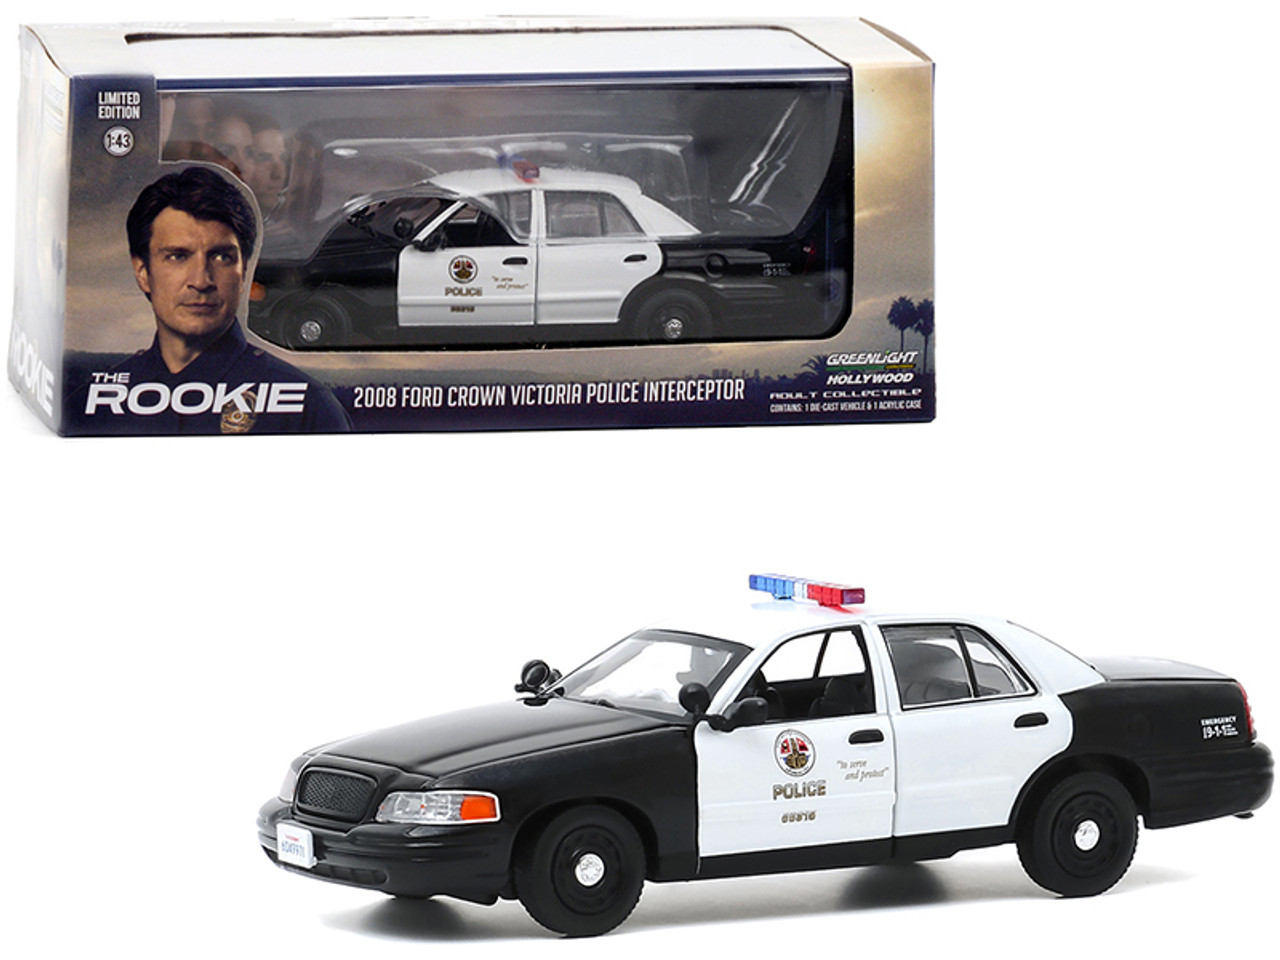 2008 Ford Crown Victoria Police Interceptor White and Black "LAPD" (Los Angeles Police Department) "The Rookie" (2018) TV Series 1/43 Diecast Model Car by Greenlight